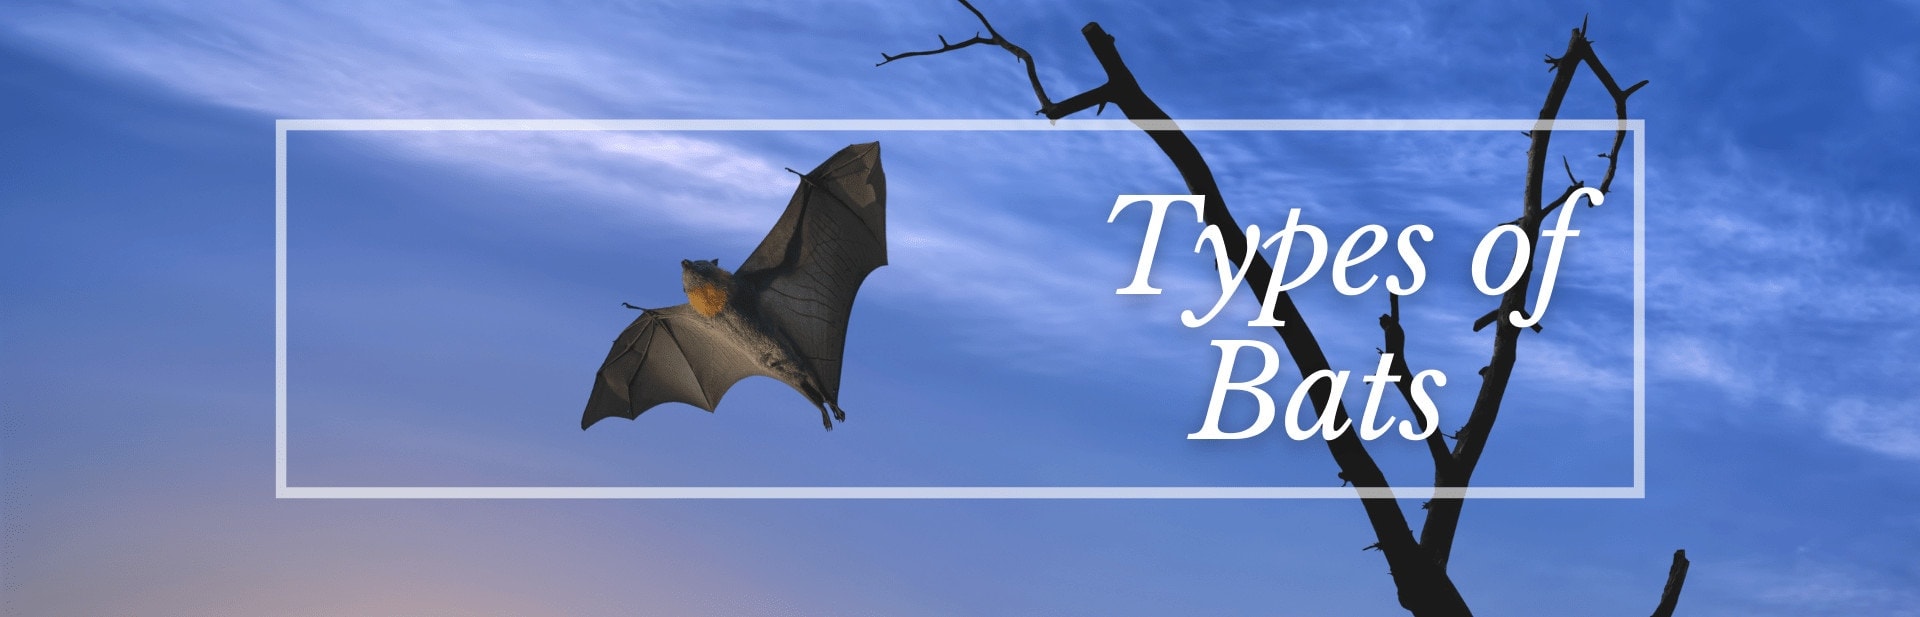 Discover 28 Types of Bats: The Cutest Bat Species Revealed (Names, Photos, and More)